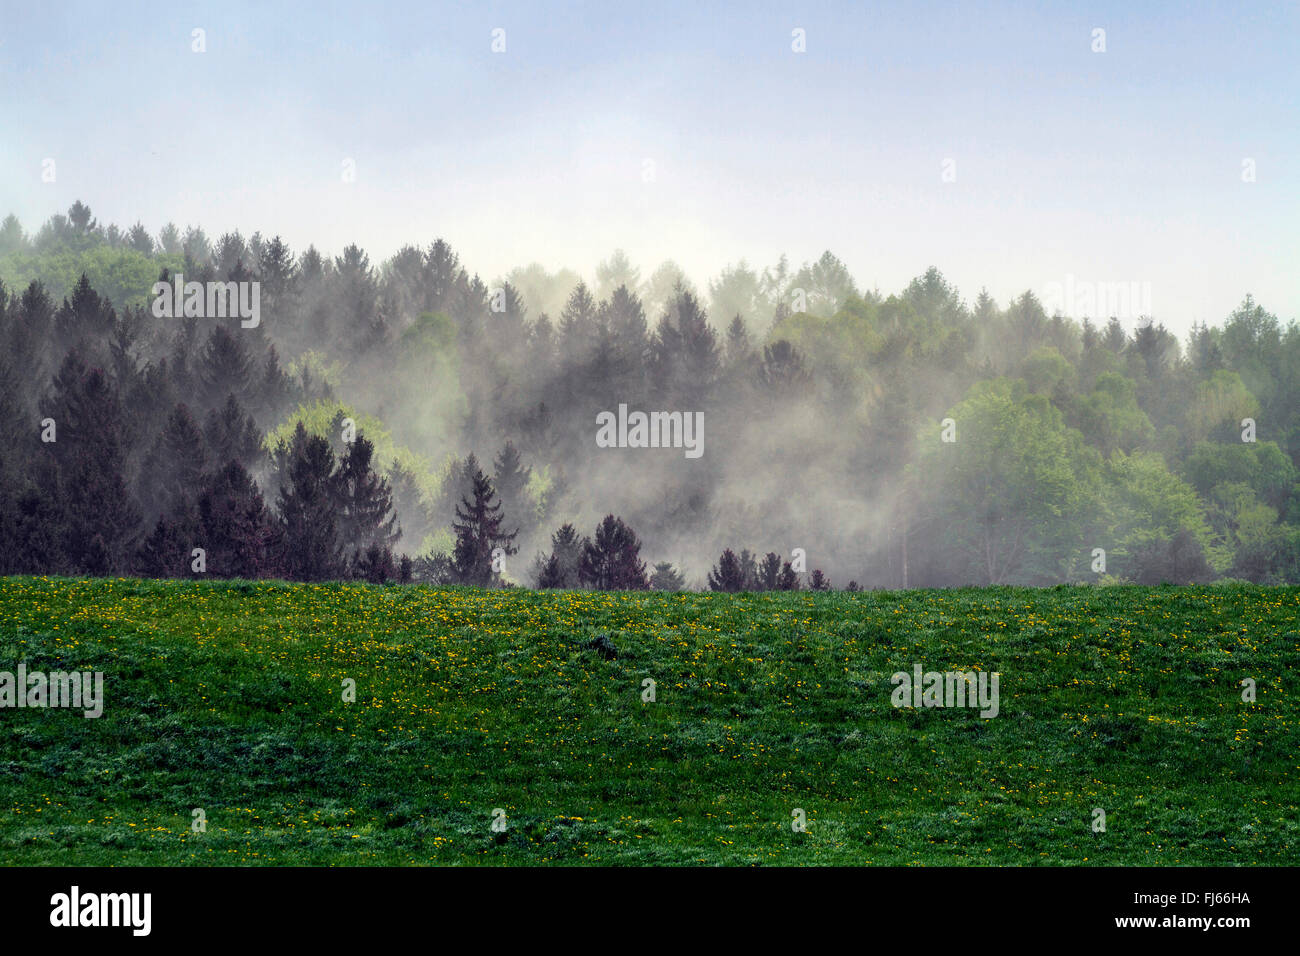 Norway spruce (Picea abies), spruce pollen clouds blowing through coniferous forest, Germany, Bavaria, Oberbayern, Upper Bavaria Stock Photo